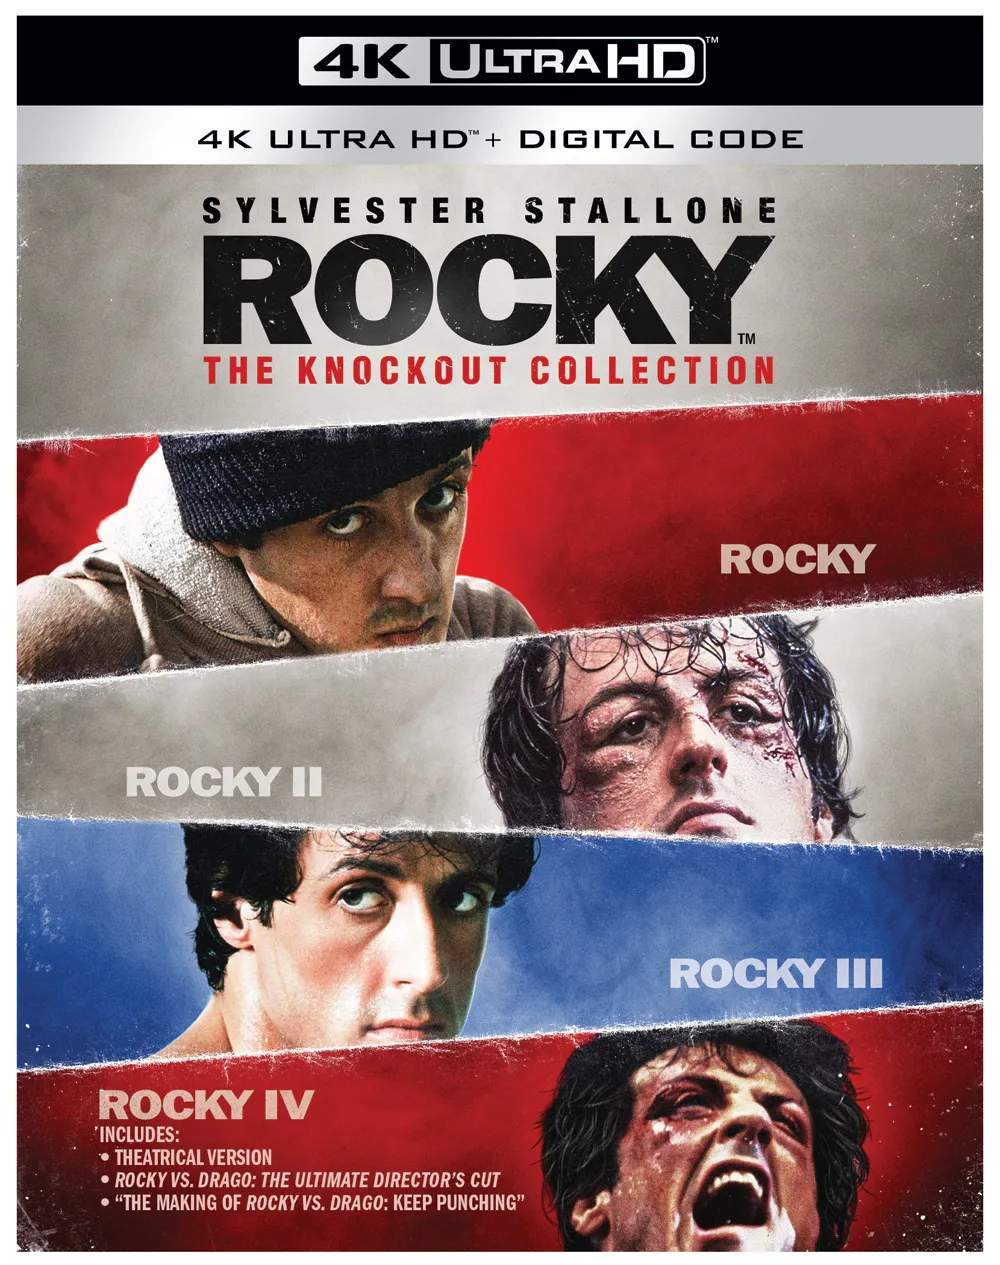 'Rocky Knockout Collection' with Rocky vs Drago Cut Gets 4K Release Date